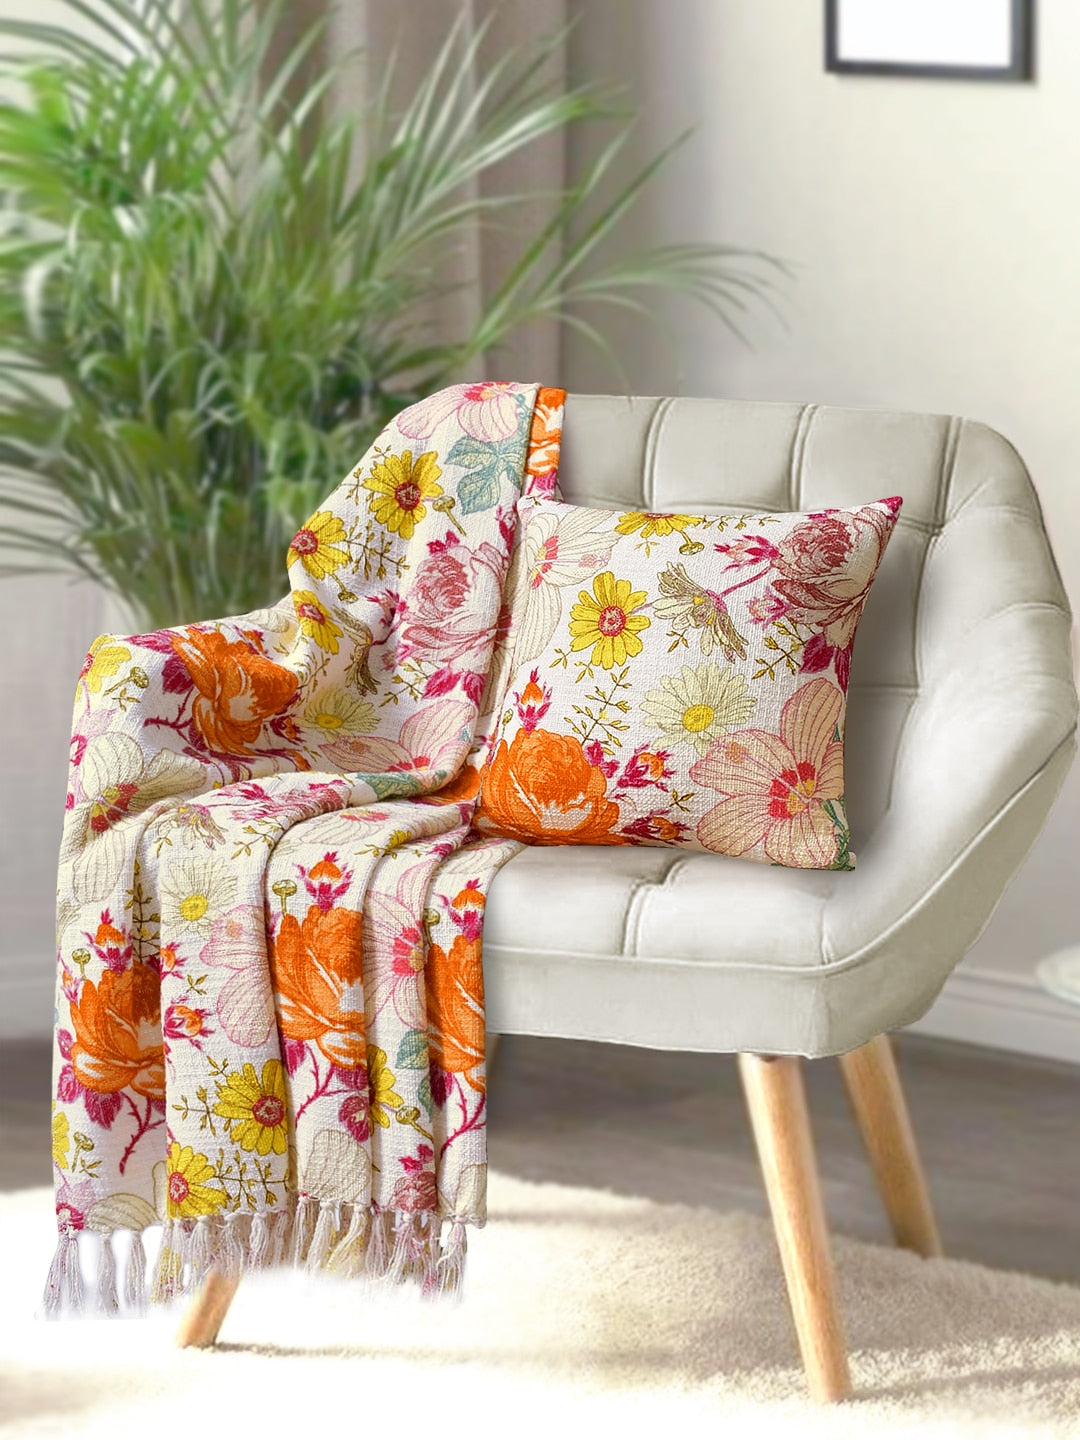 Blanc9 Floral Garden Cotton Printed Throw with Cushion Cover